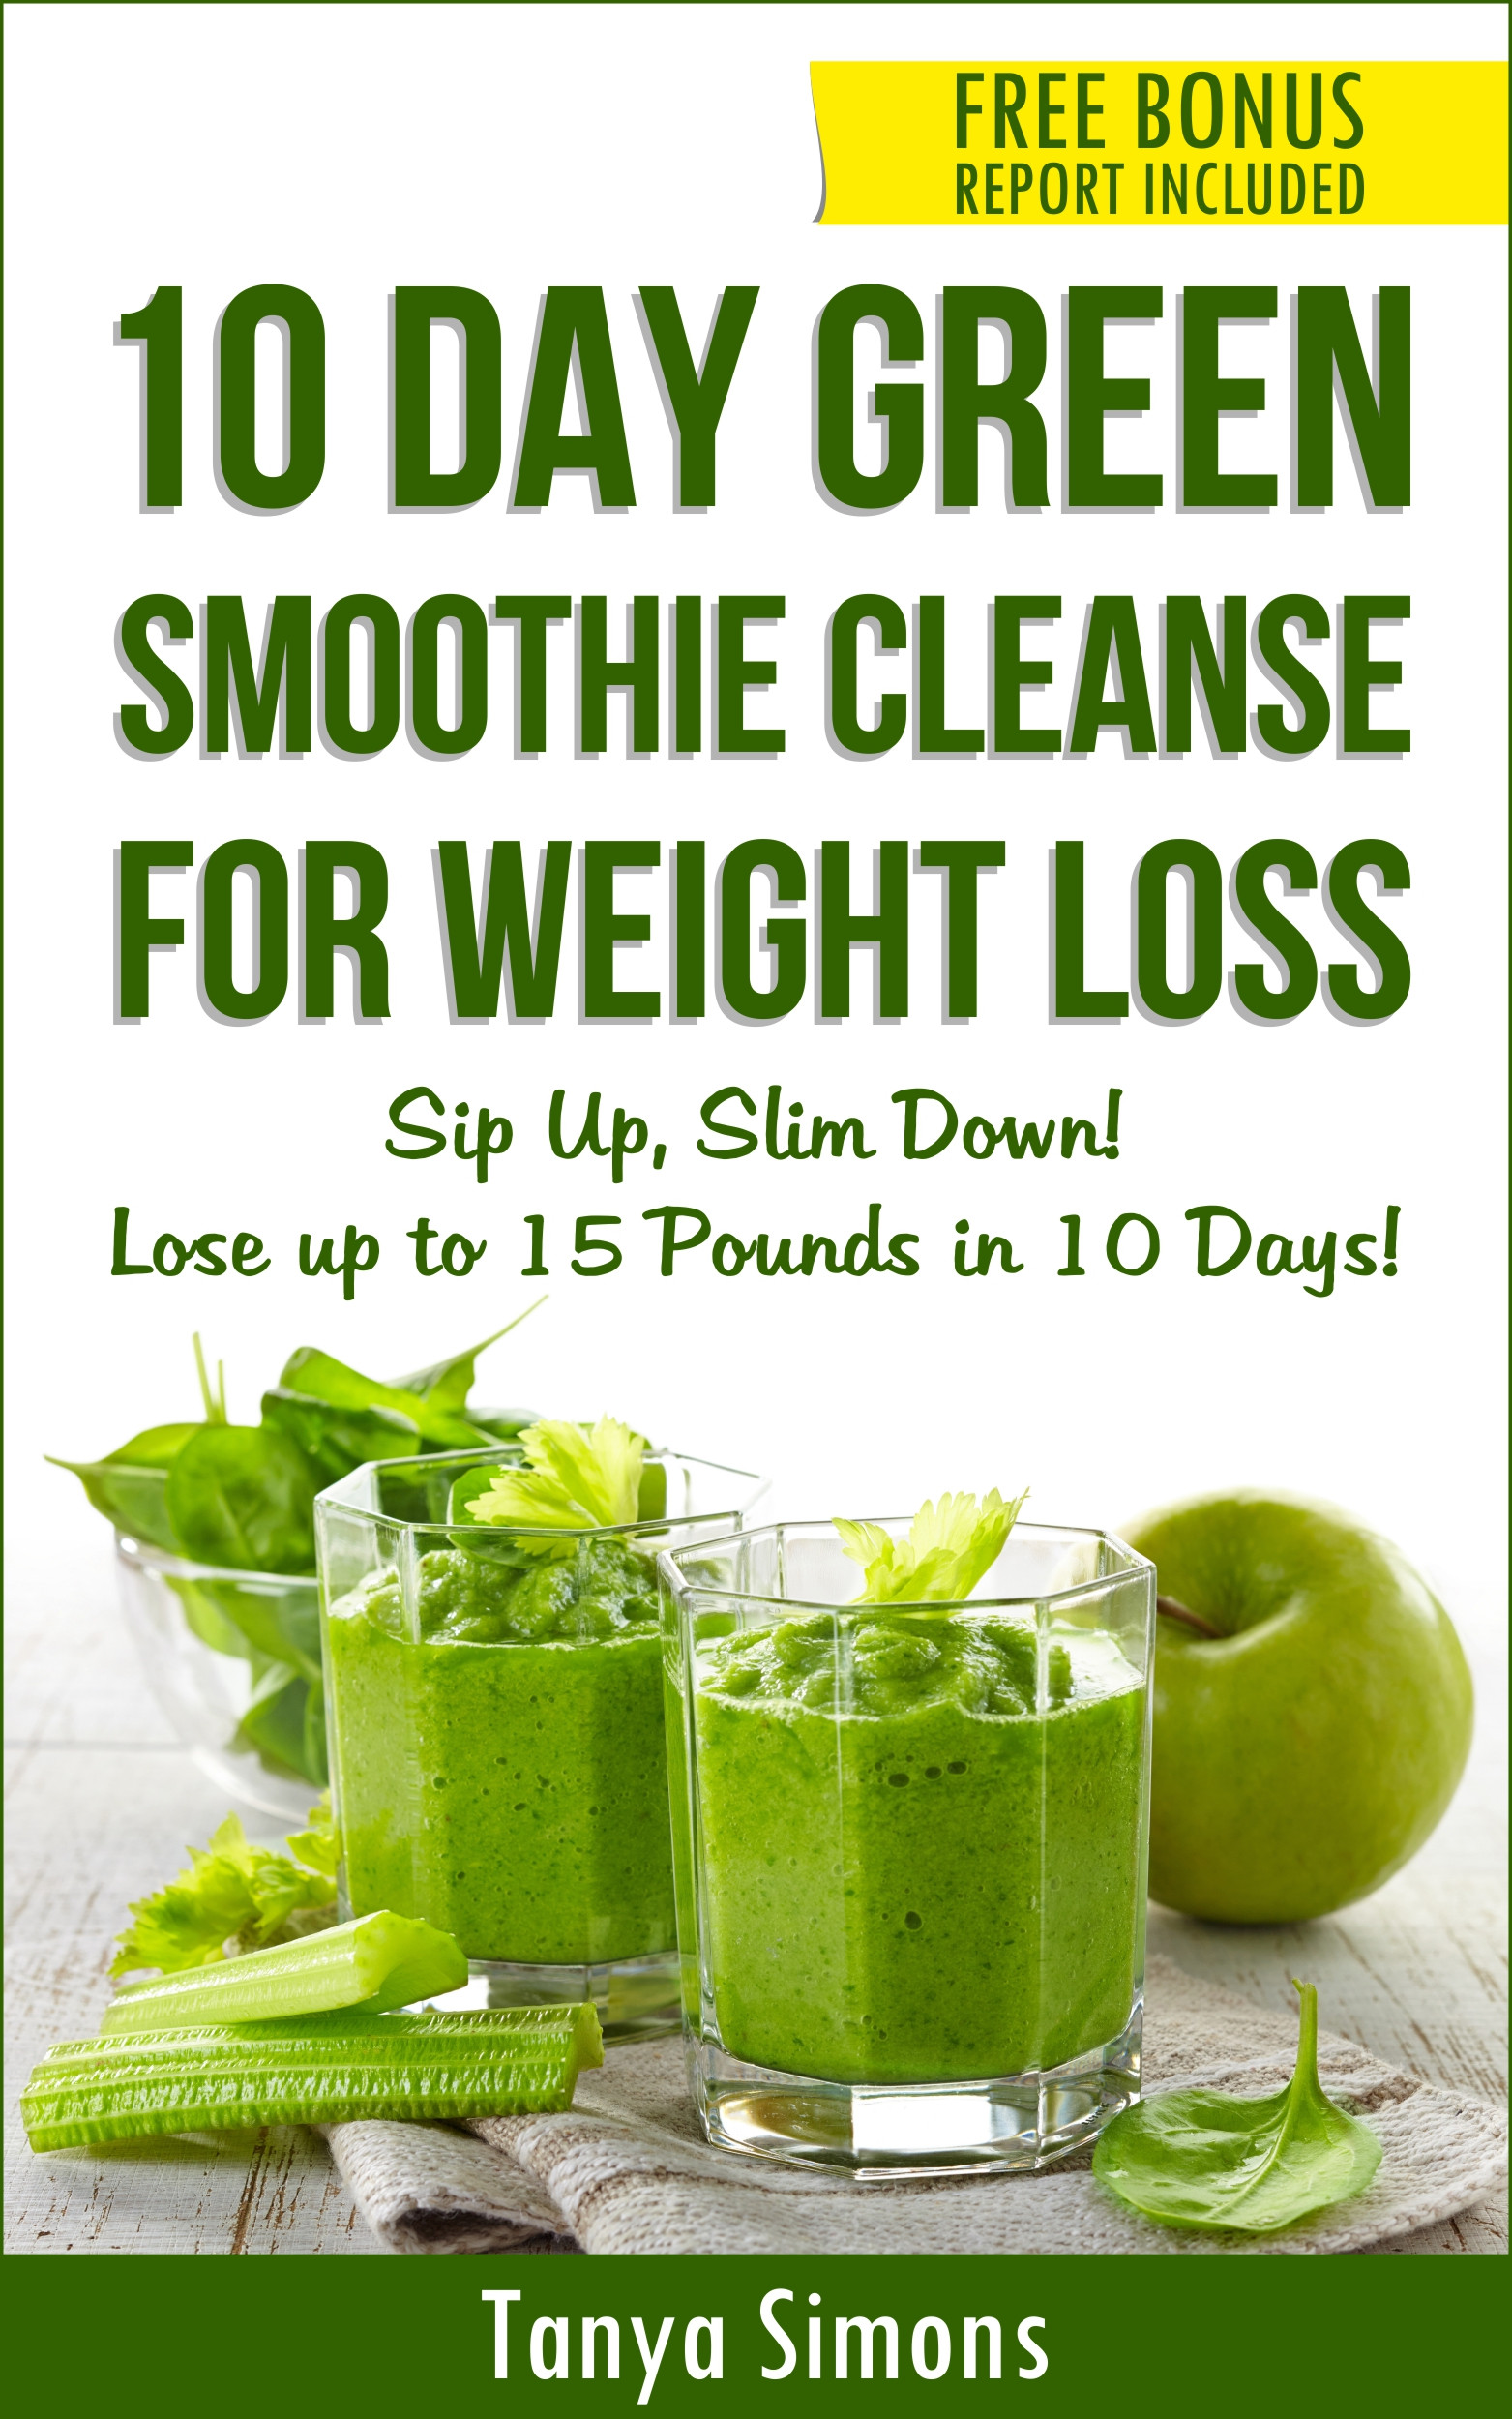 Green Smoothie Recipes For Weight Loss
 10 Day Green Smoothie Cleanse Lose 15lbs with 10 Day